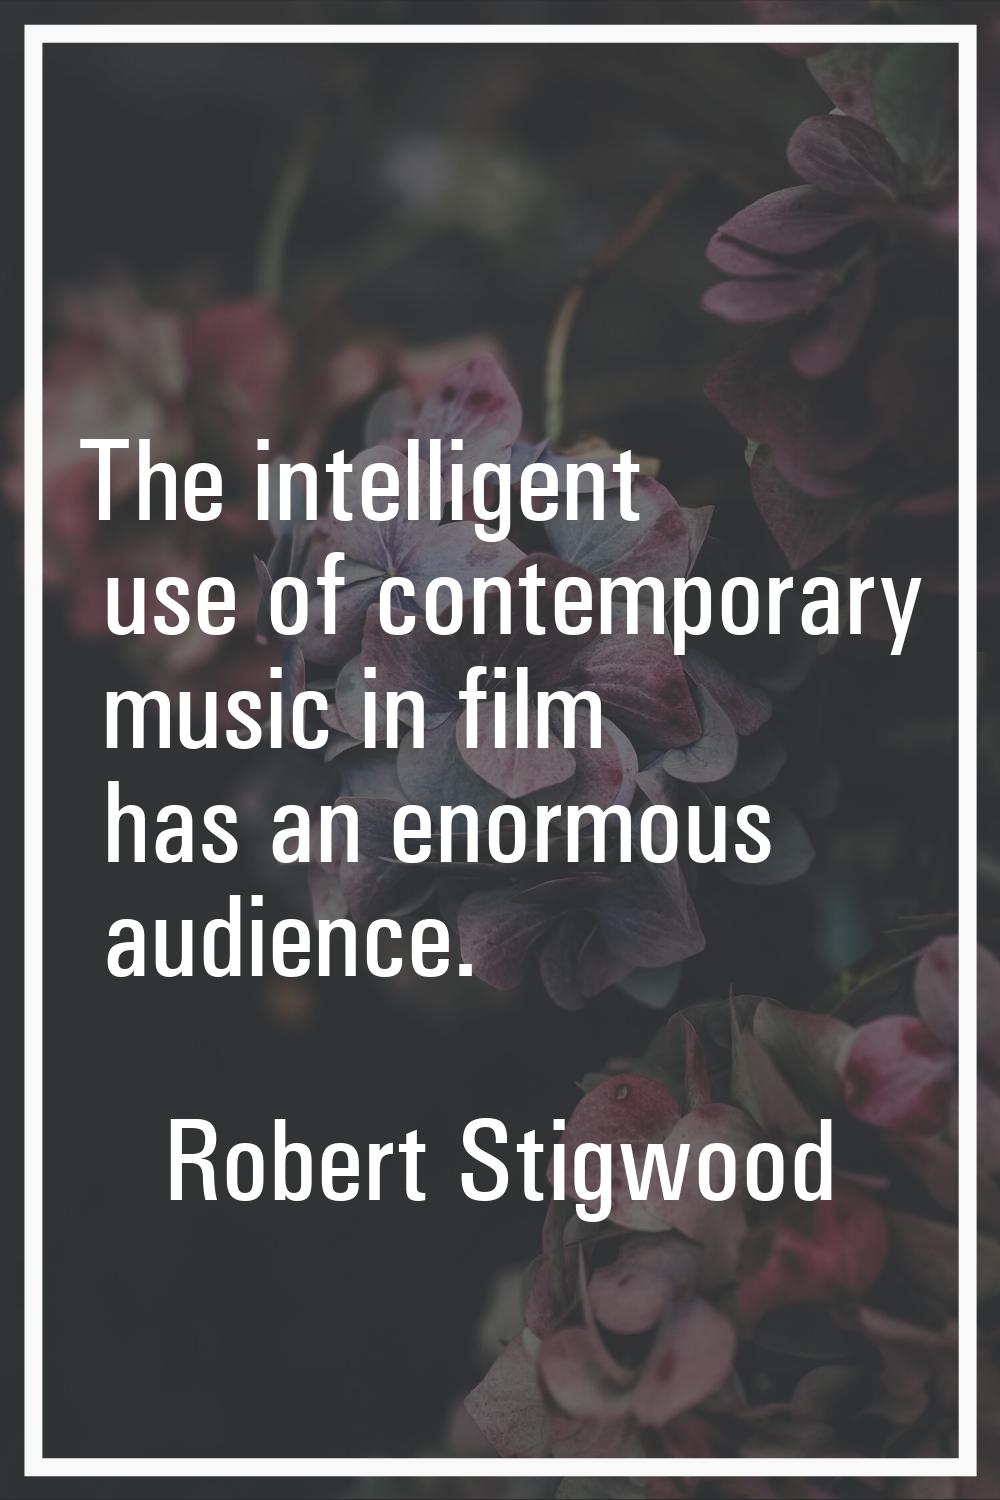 The intelligent use of contemporary music in film has an enormous audience.